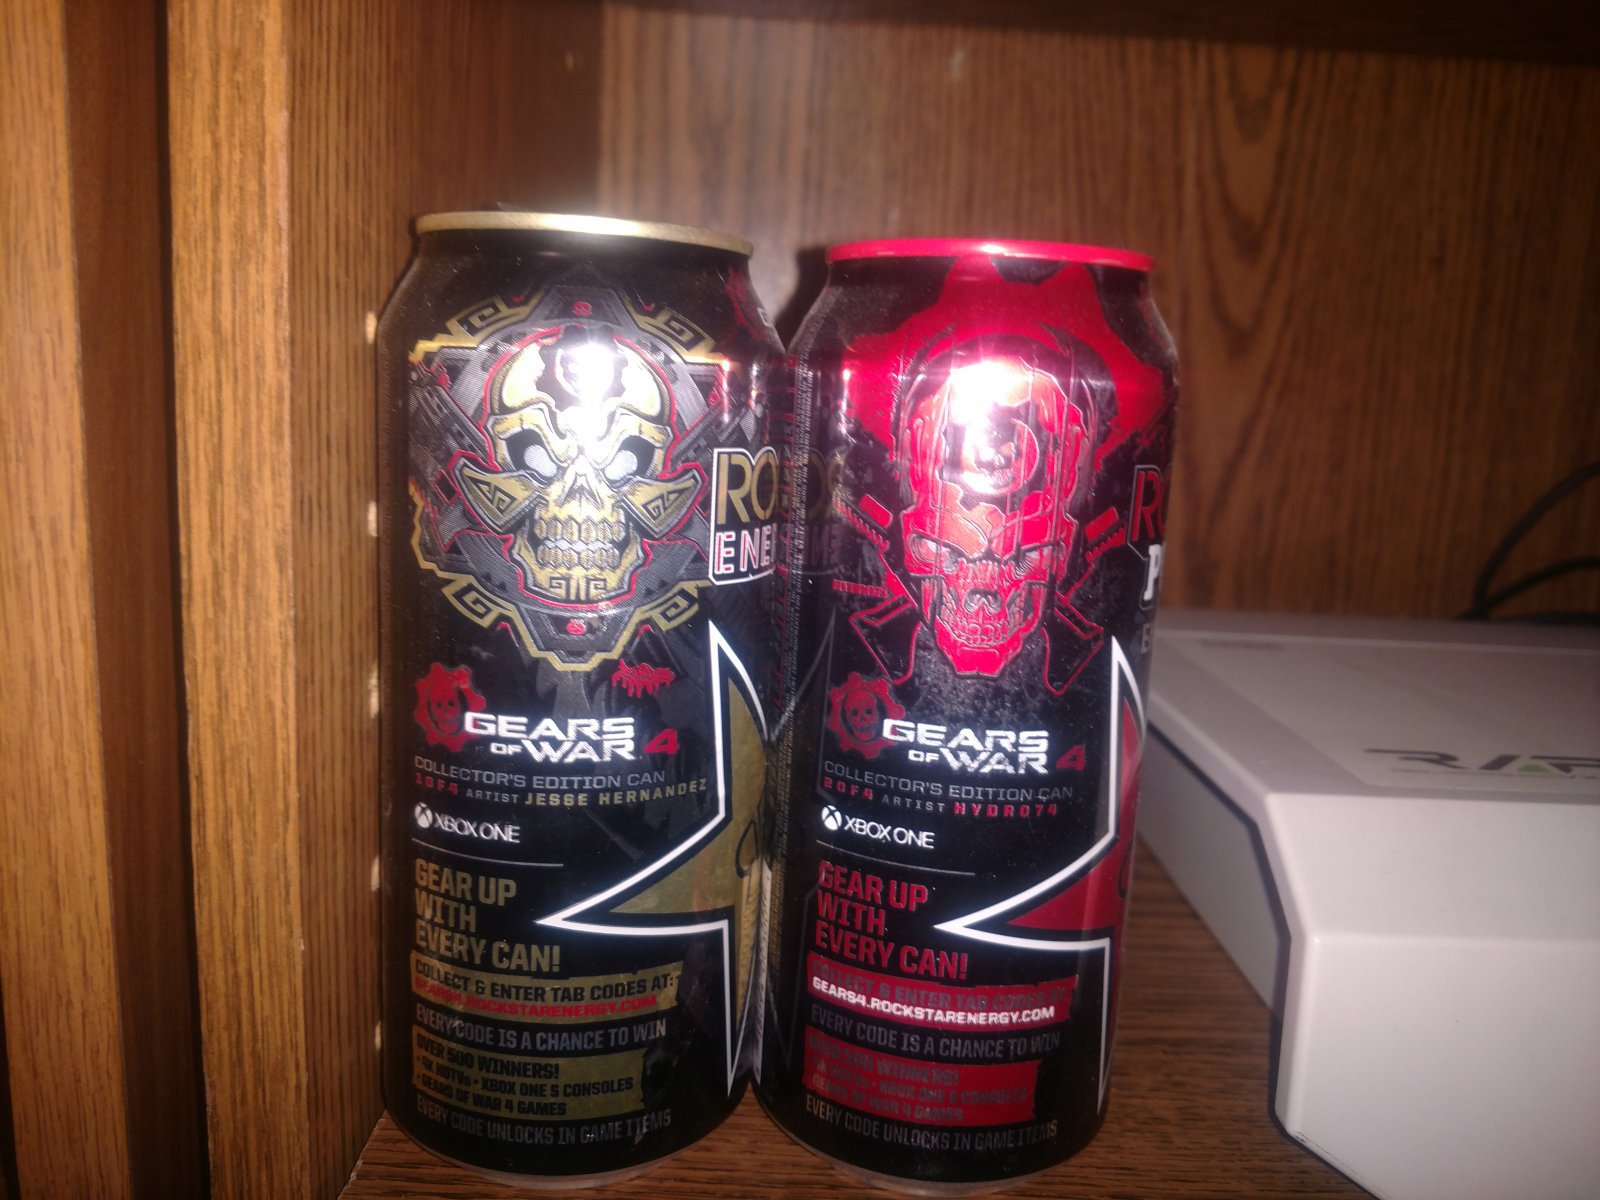 Gears of War 4 - Rockstar Energy Promotional cans 1 and 2 of 4